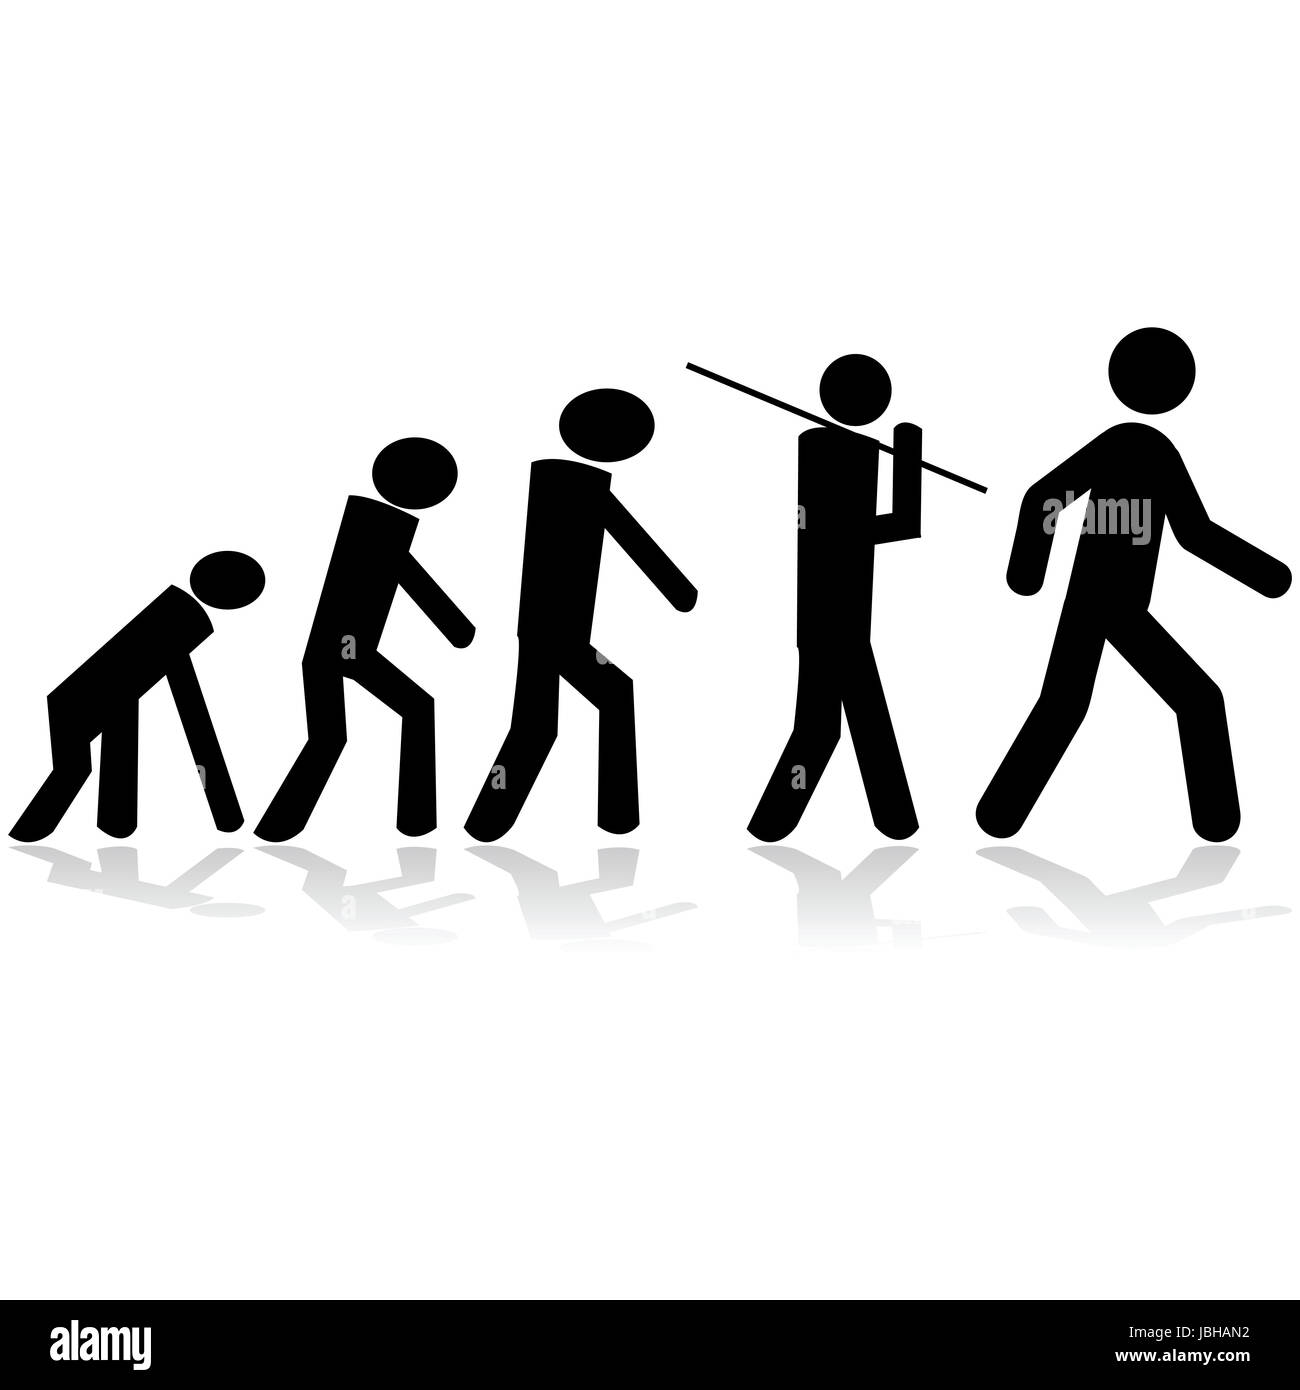 Concept illustration showing stick figures evolving from a monkey to a man Stock Photo